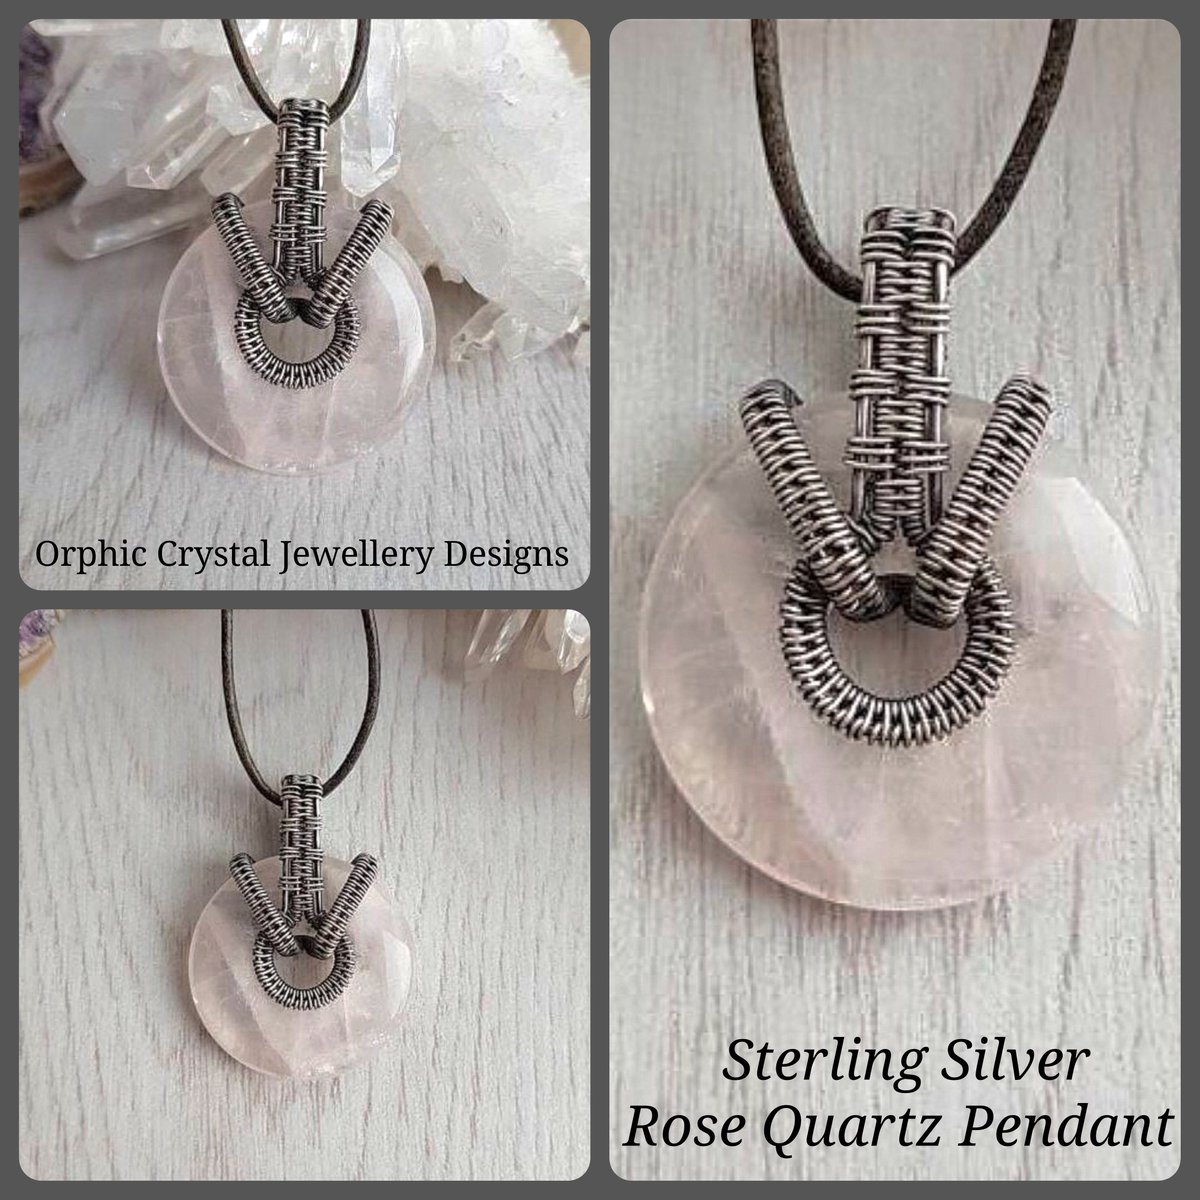 Available Now!
Calming #Rosequartz wrapped in sterling & fine #silver. Free uk p&p. Dm to claim it as your own or find me on facebook 🥰
#handmade #crystaljewellery #MondayMotivation #queenof #SmallBiz #handmadejewelry #giftideas #healingjewellery #spiritual #jewellery #crystals